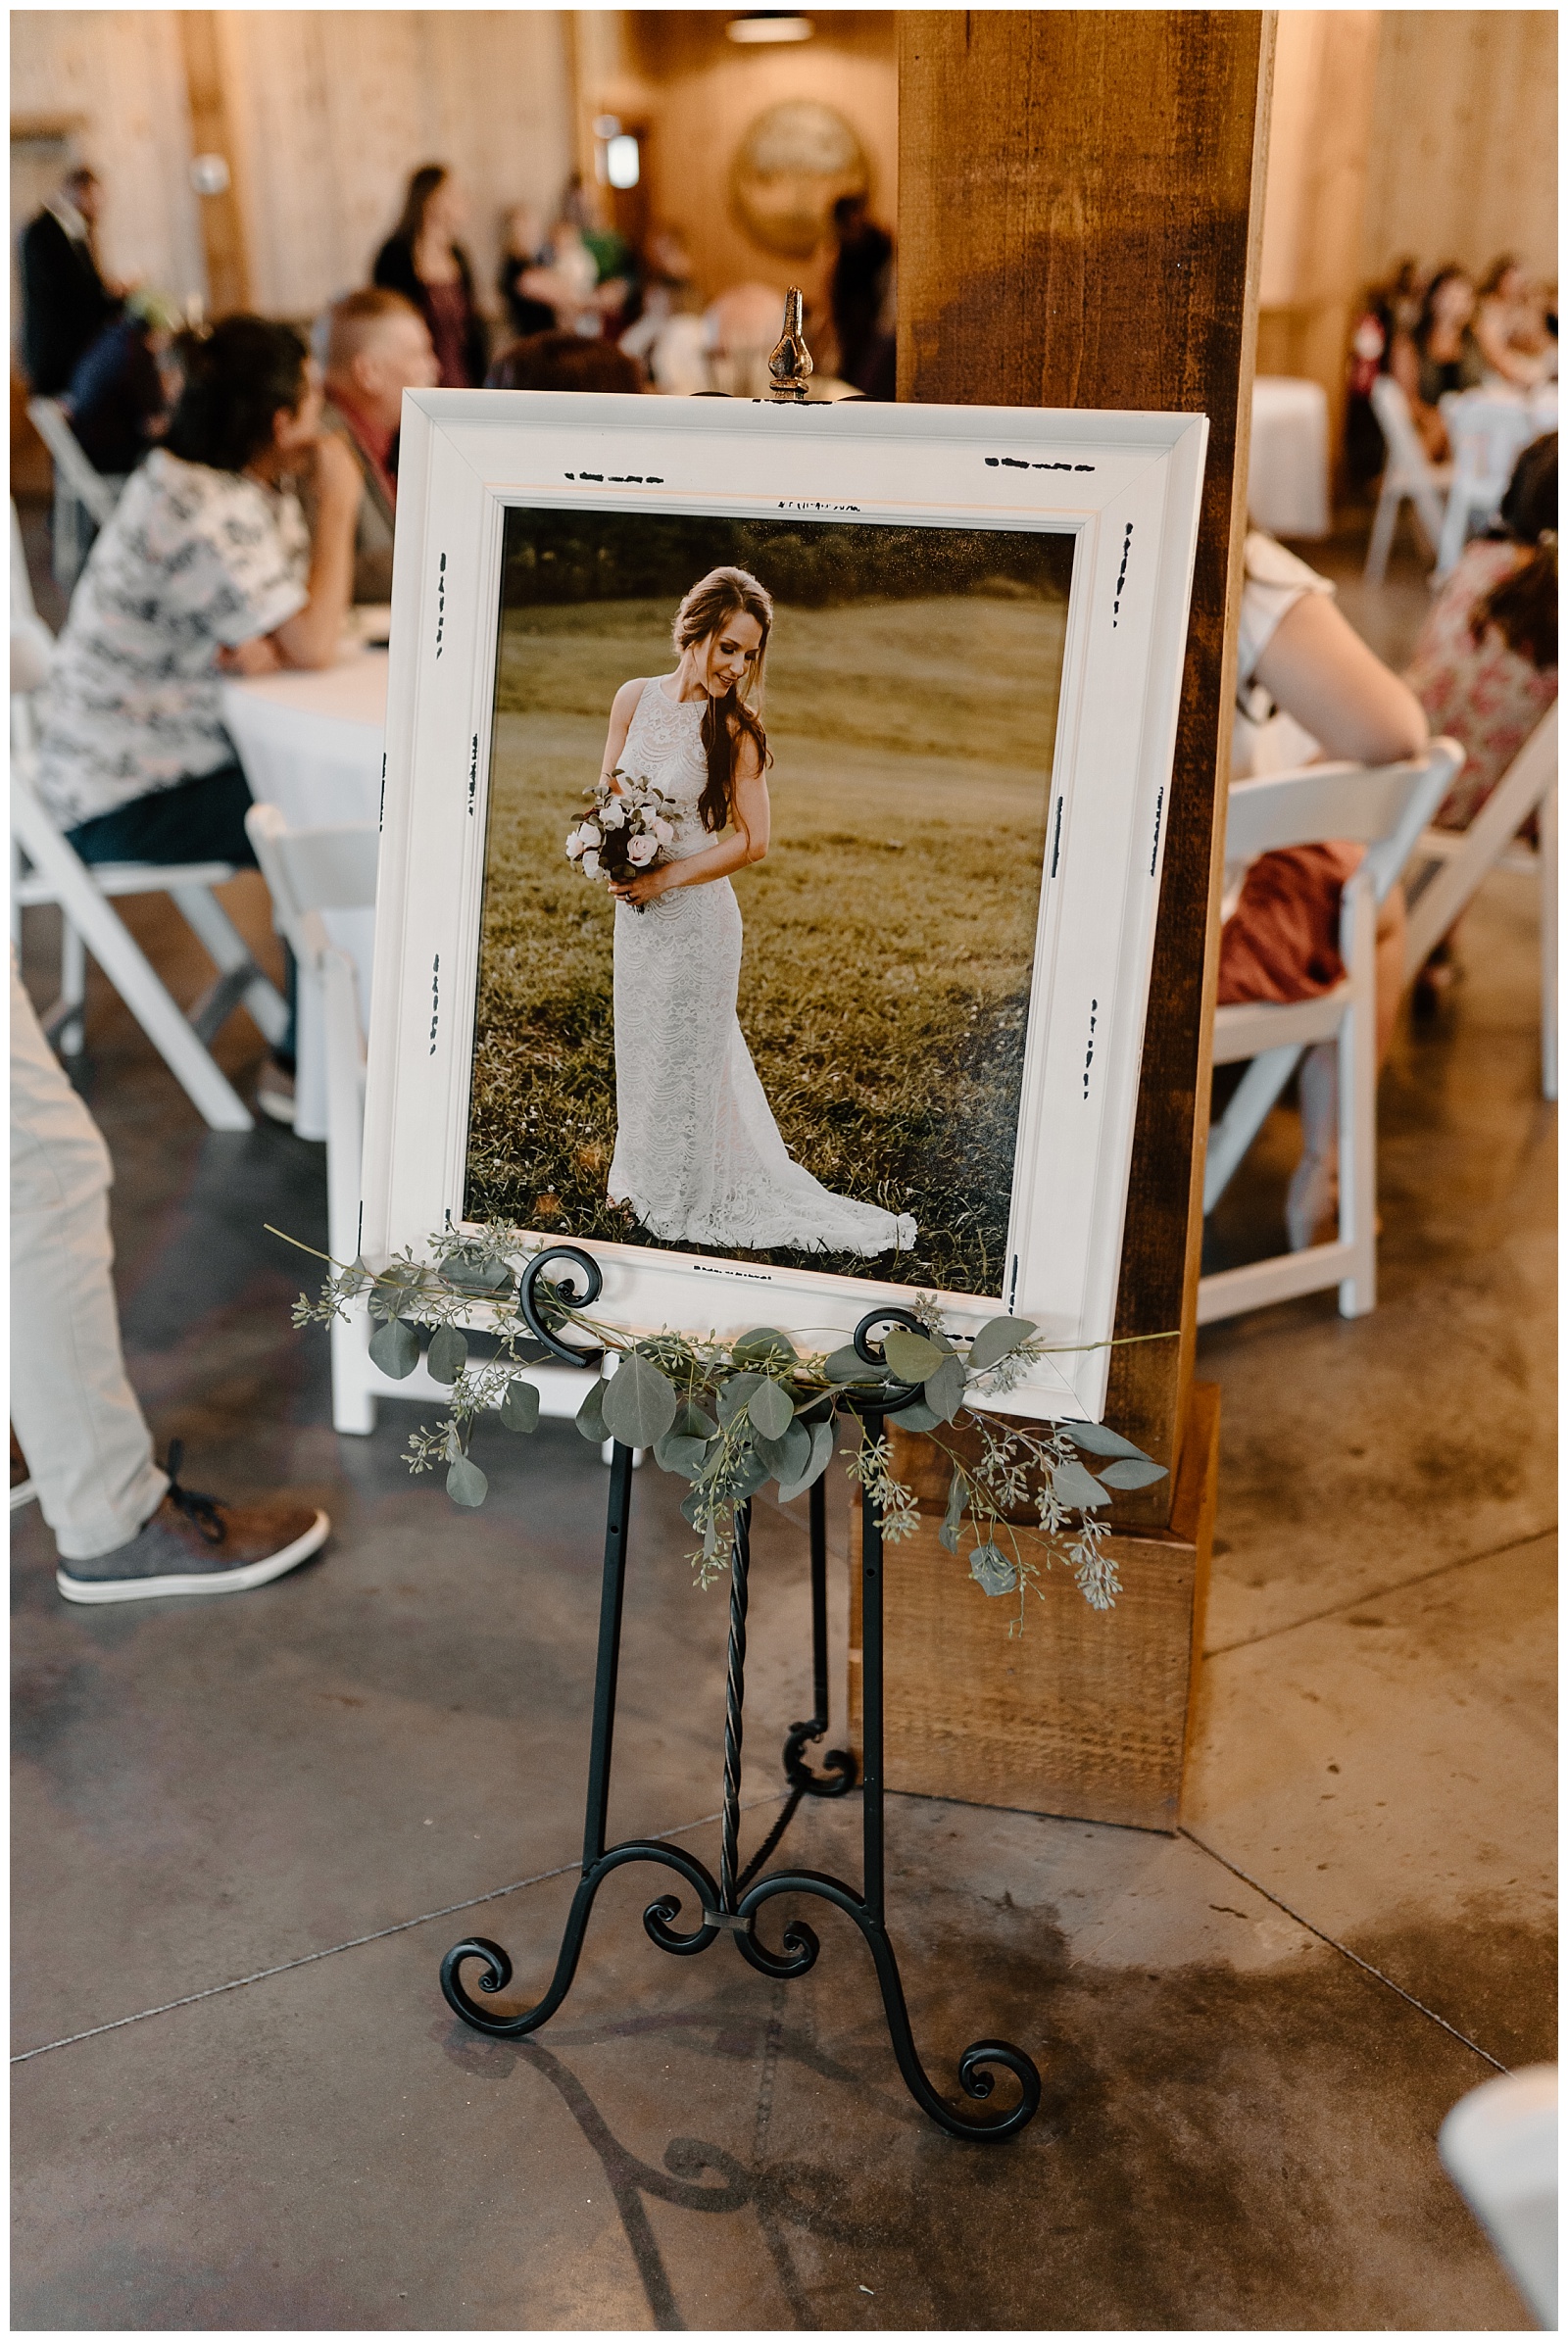 Portrait of a bride in a large white frame on display at her wedding reception